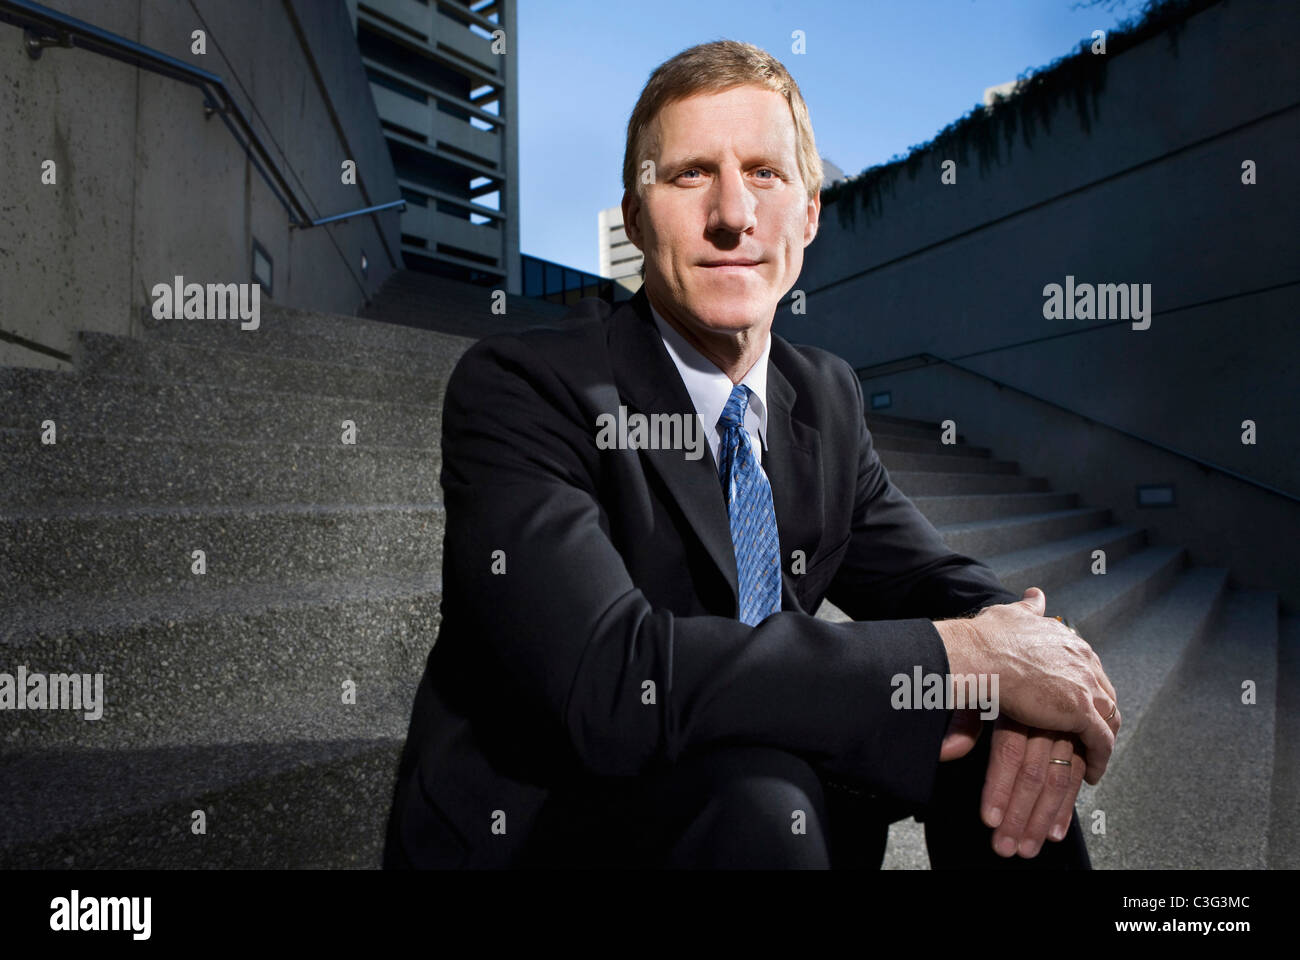 Caucasian businessman sitting on outdoor staircase Stock Photo